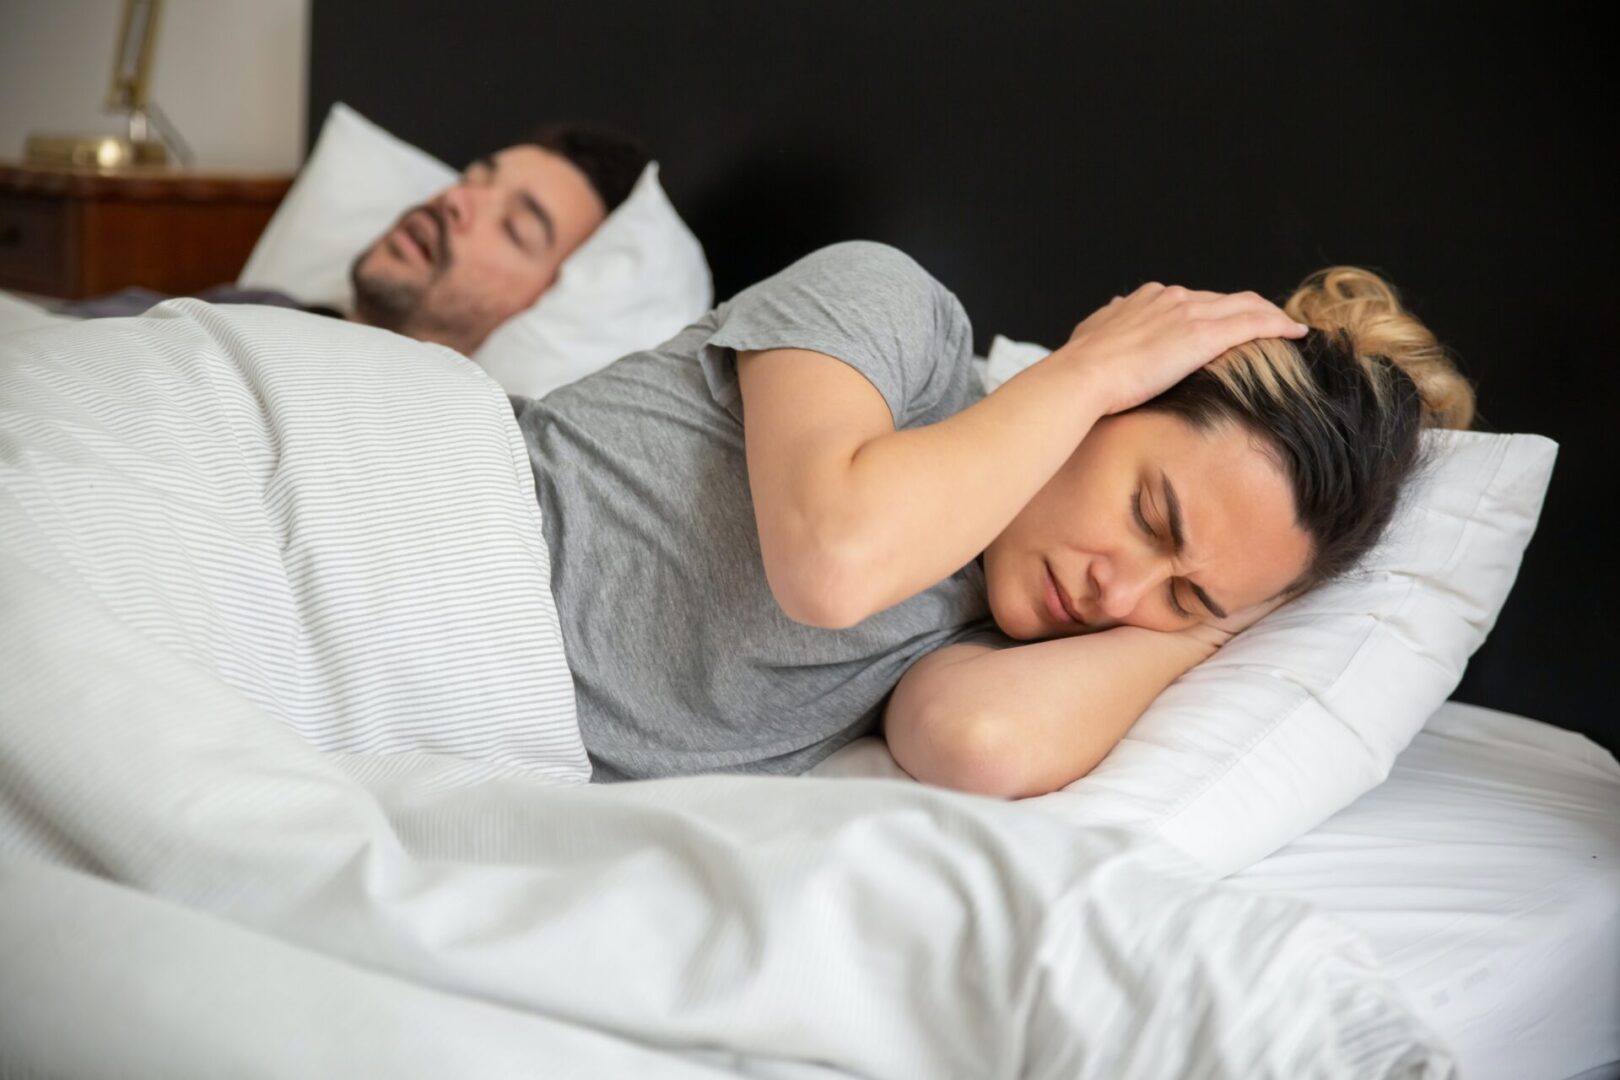 A man and woman sleeping in bed with one of them covering their ears.